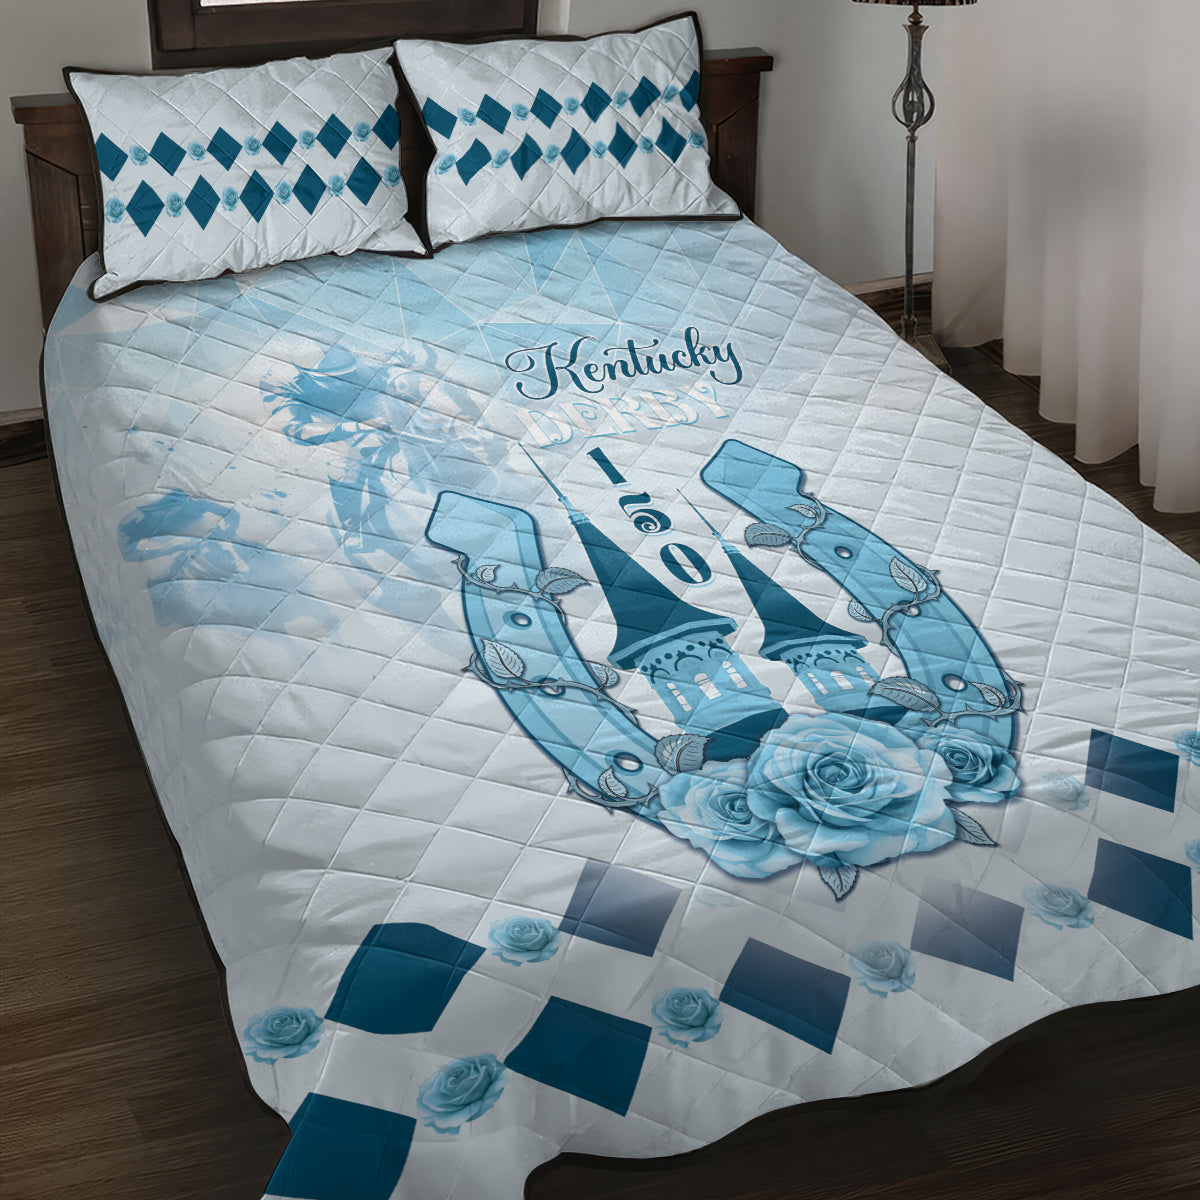 Kentucky Horse Racing Quilt Bed Set 150th Anniversary Blue Version